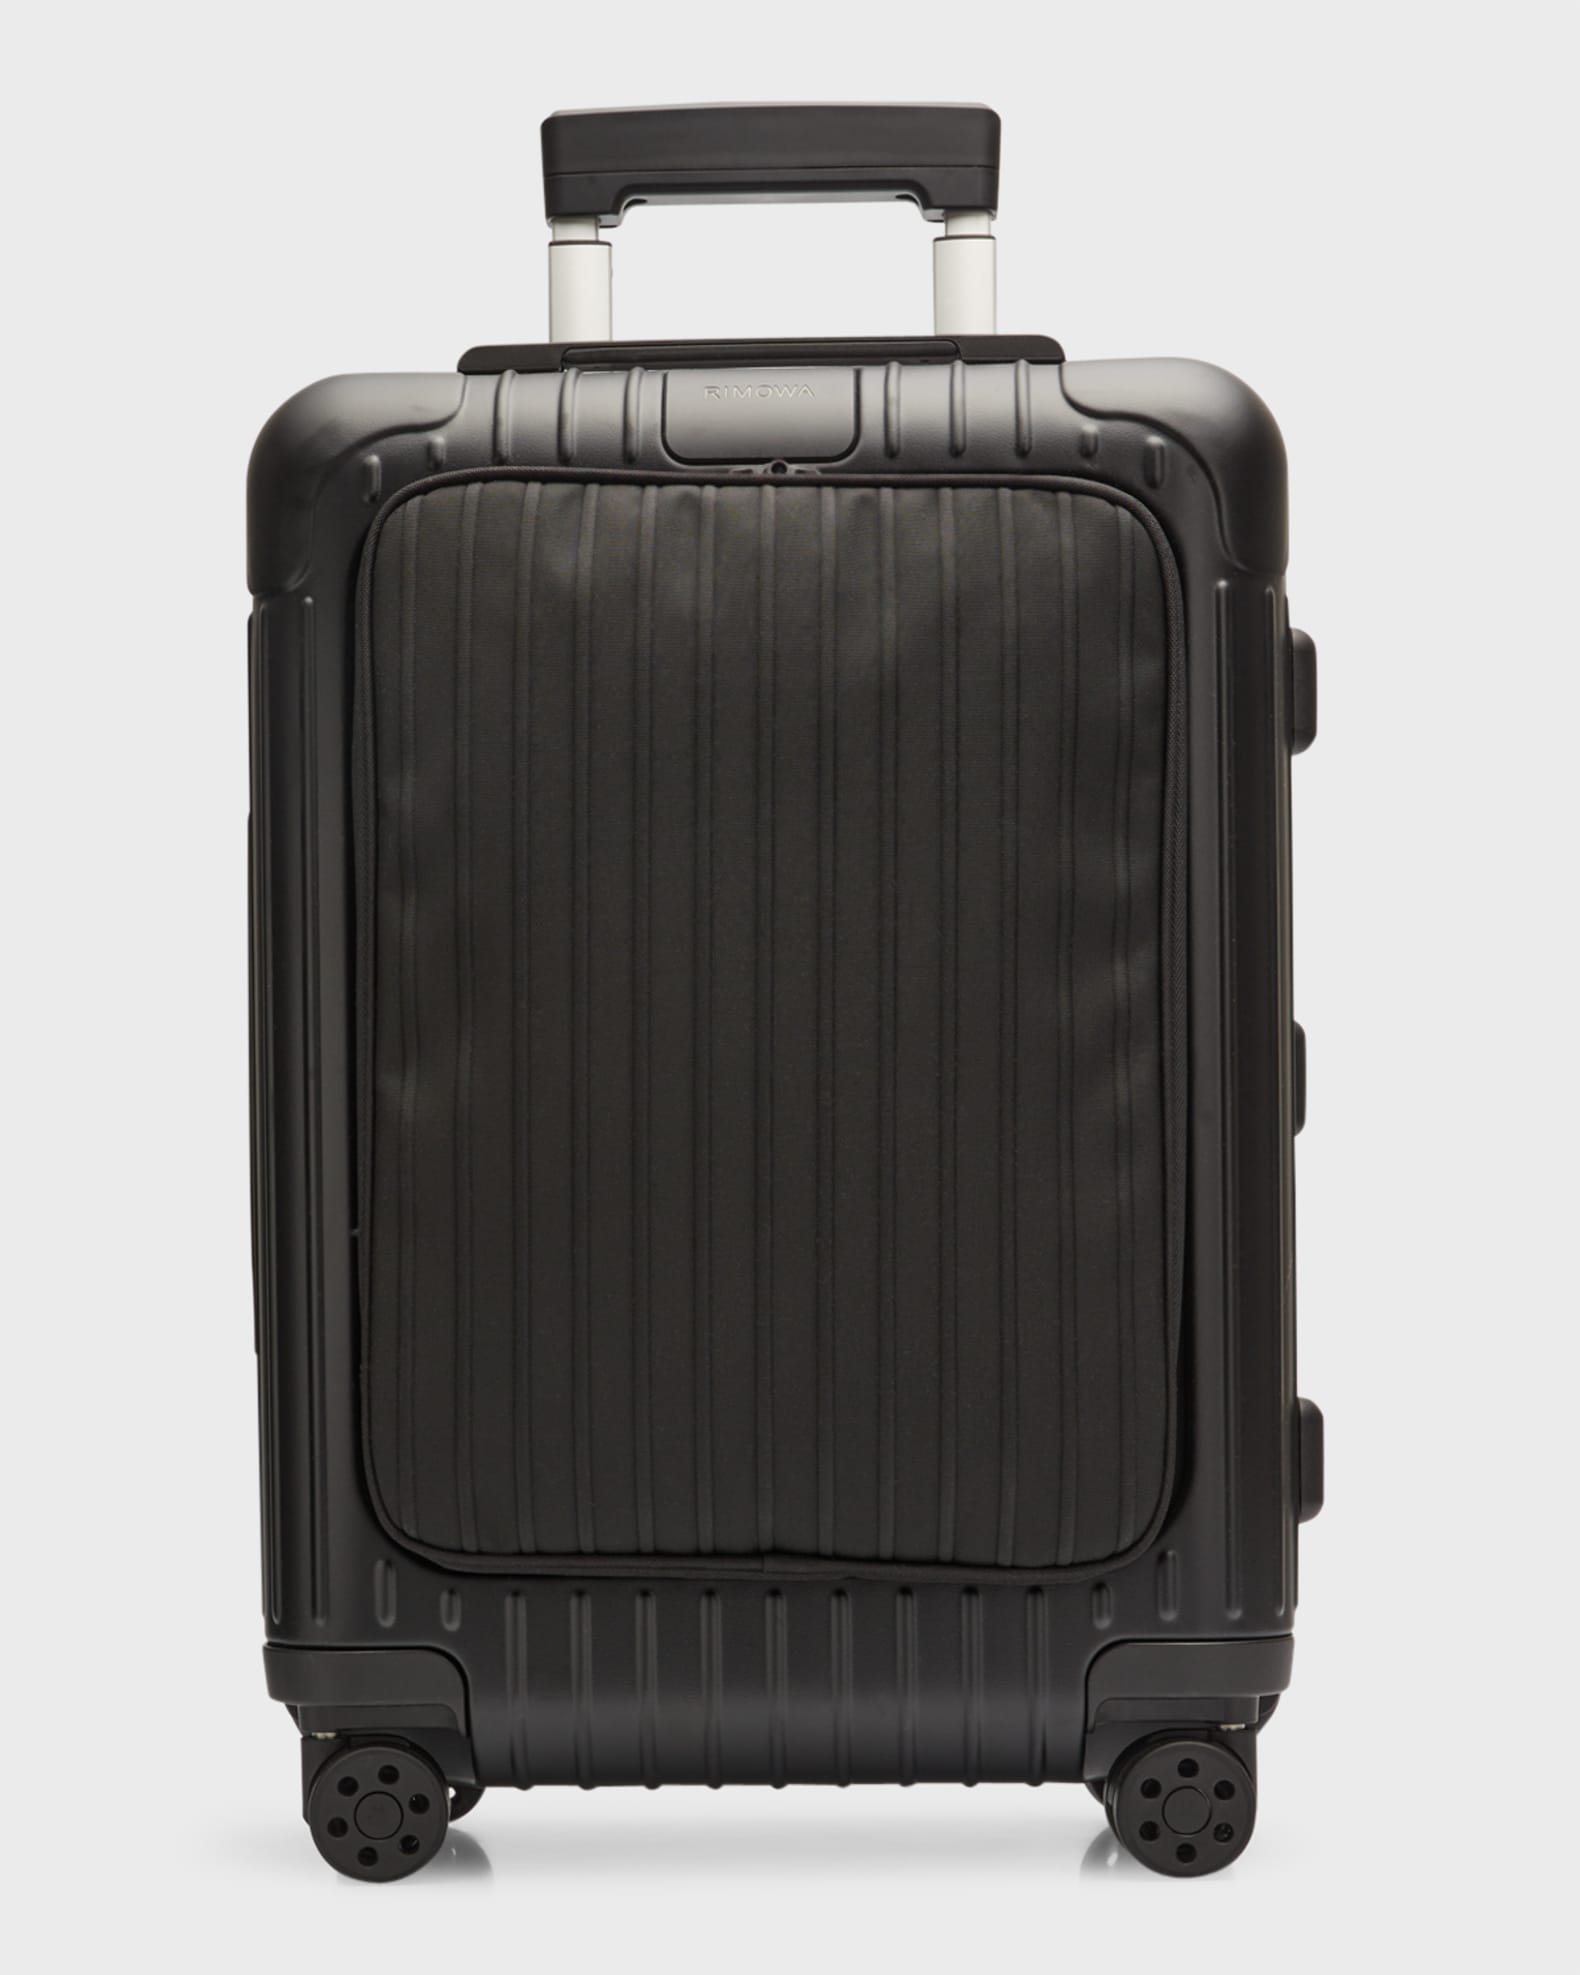 Rimowa Classic Cabin S Aluminum Small Carry-On Suitcase, Silver - clothing  & accessories - by owner - apparel sale 